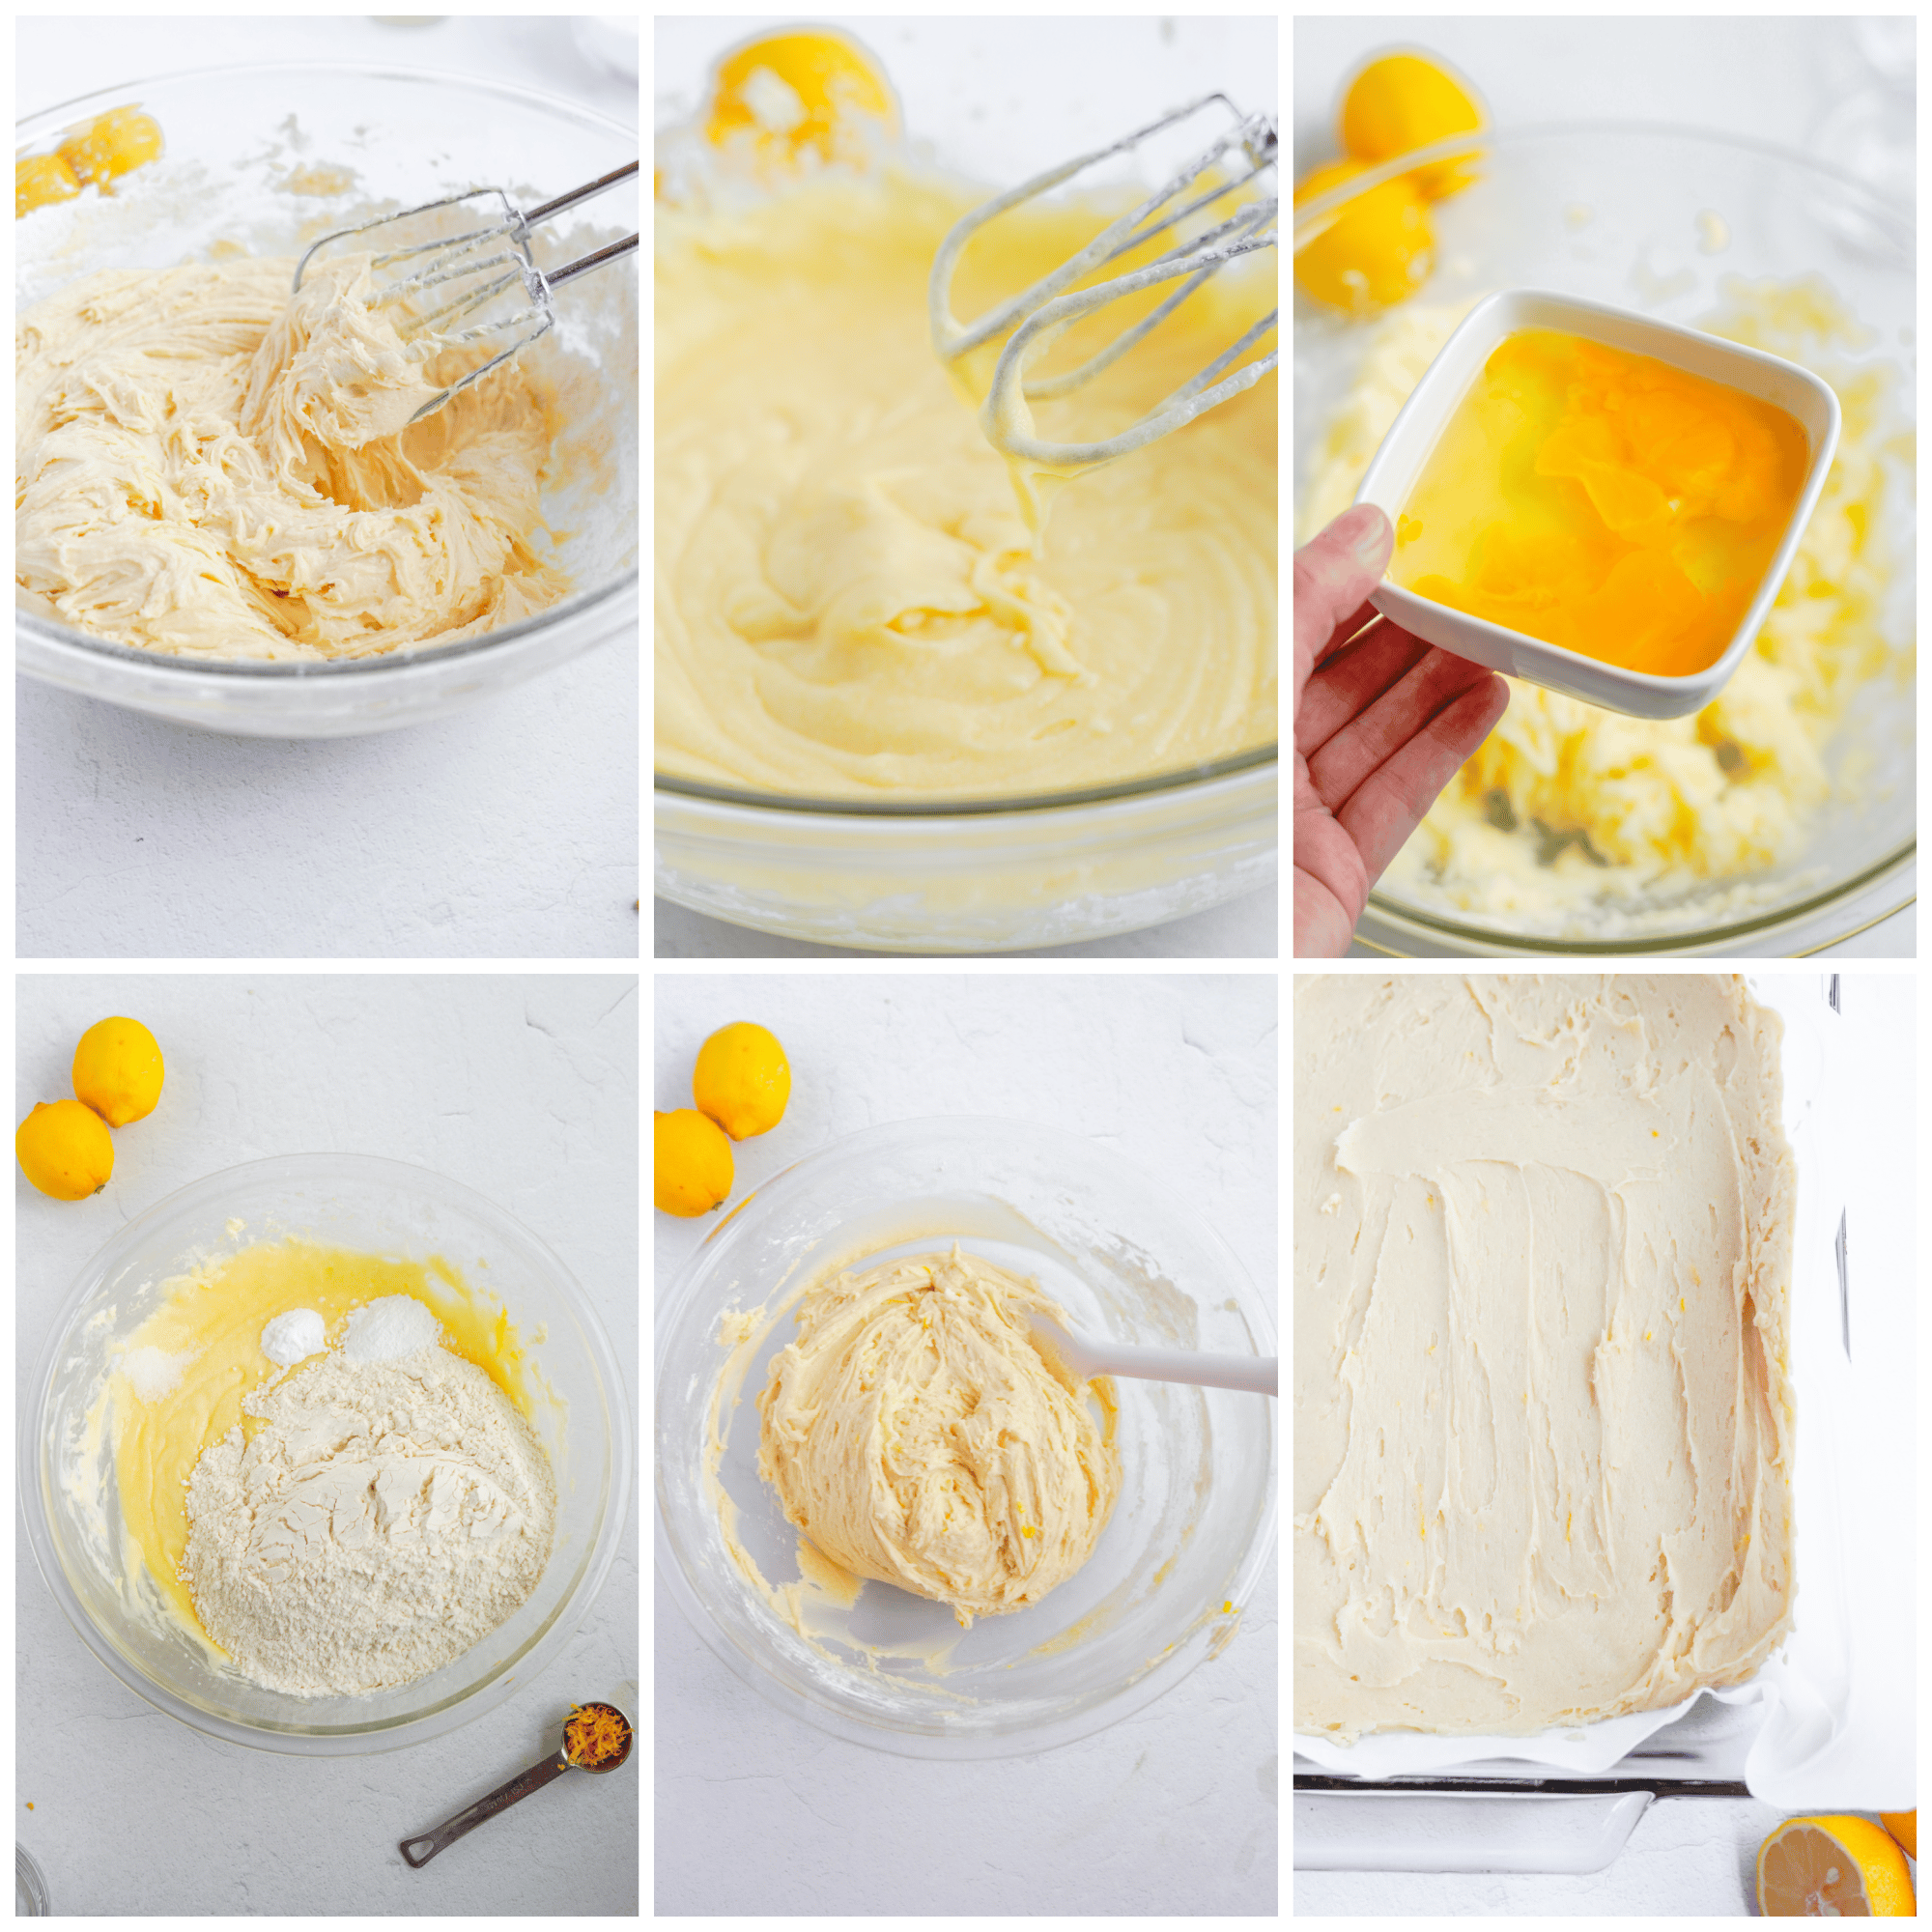 Collage images showing the steps needed to make Lemon Sugar Cookie Bars.